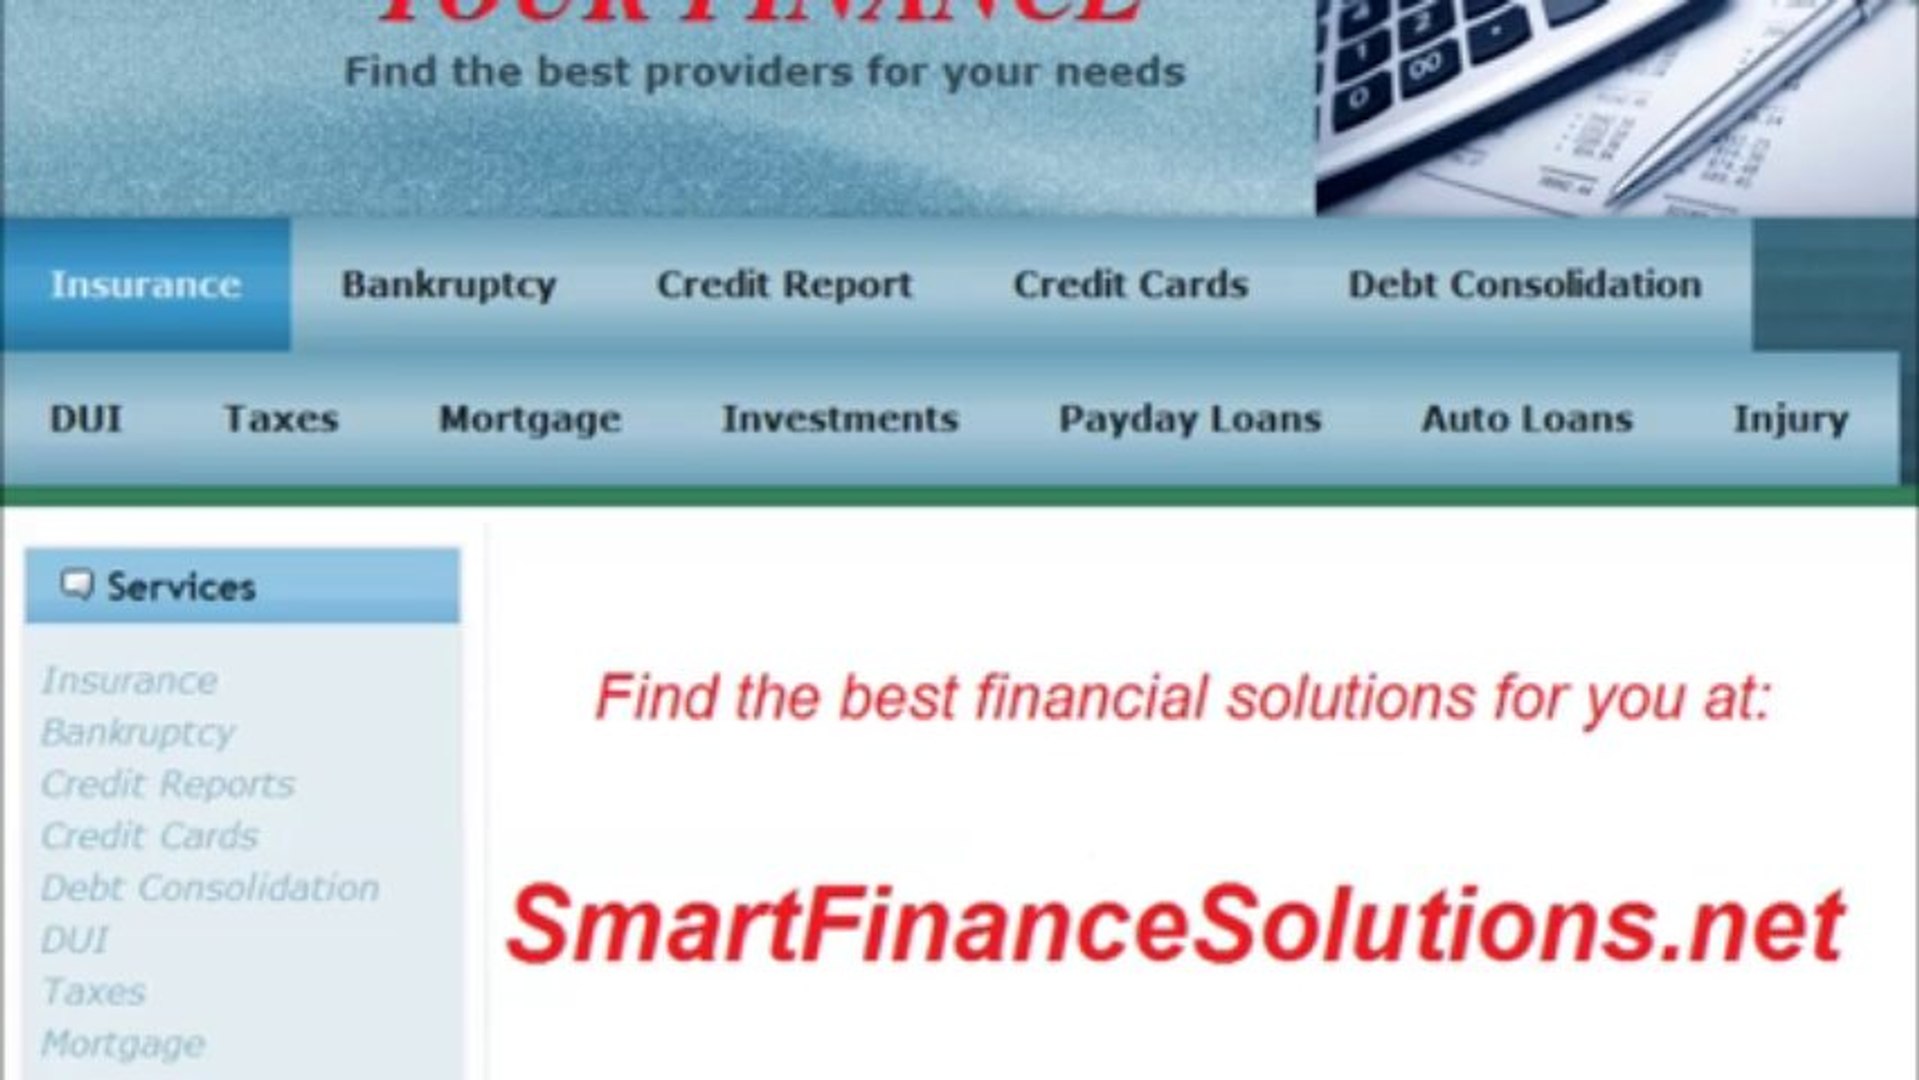 SMARTFINANCESOLUTIONS.NET - Advice about debt and payday loans?